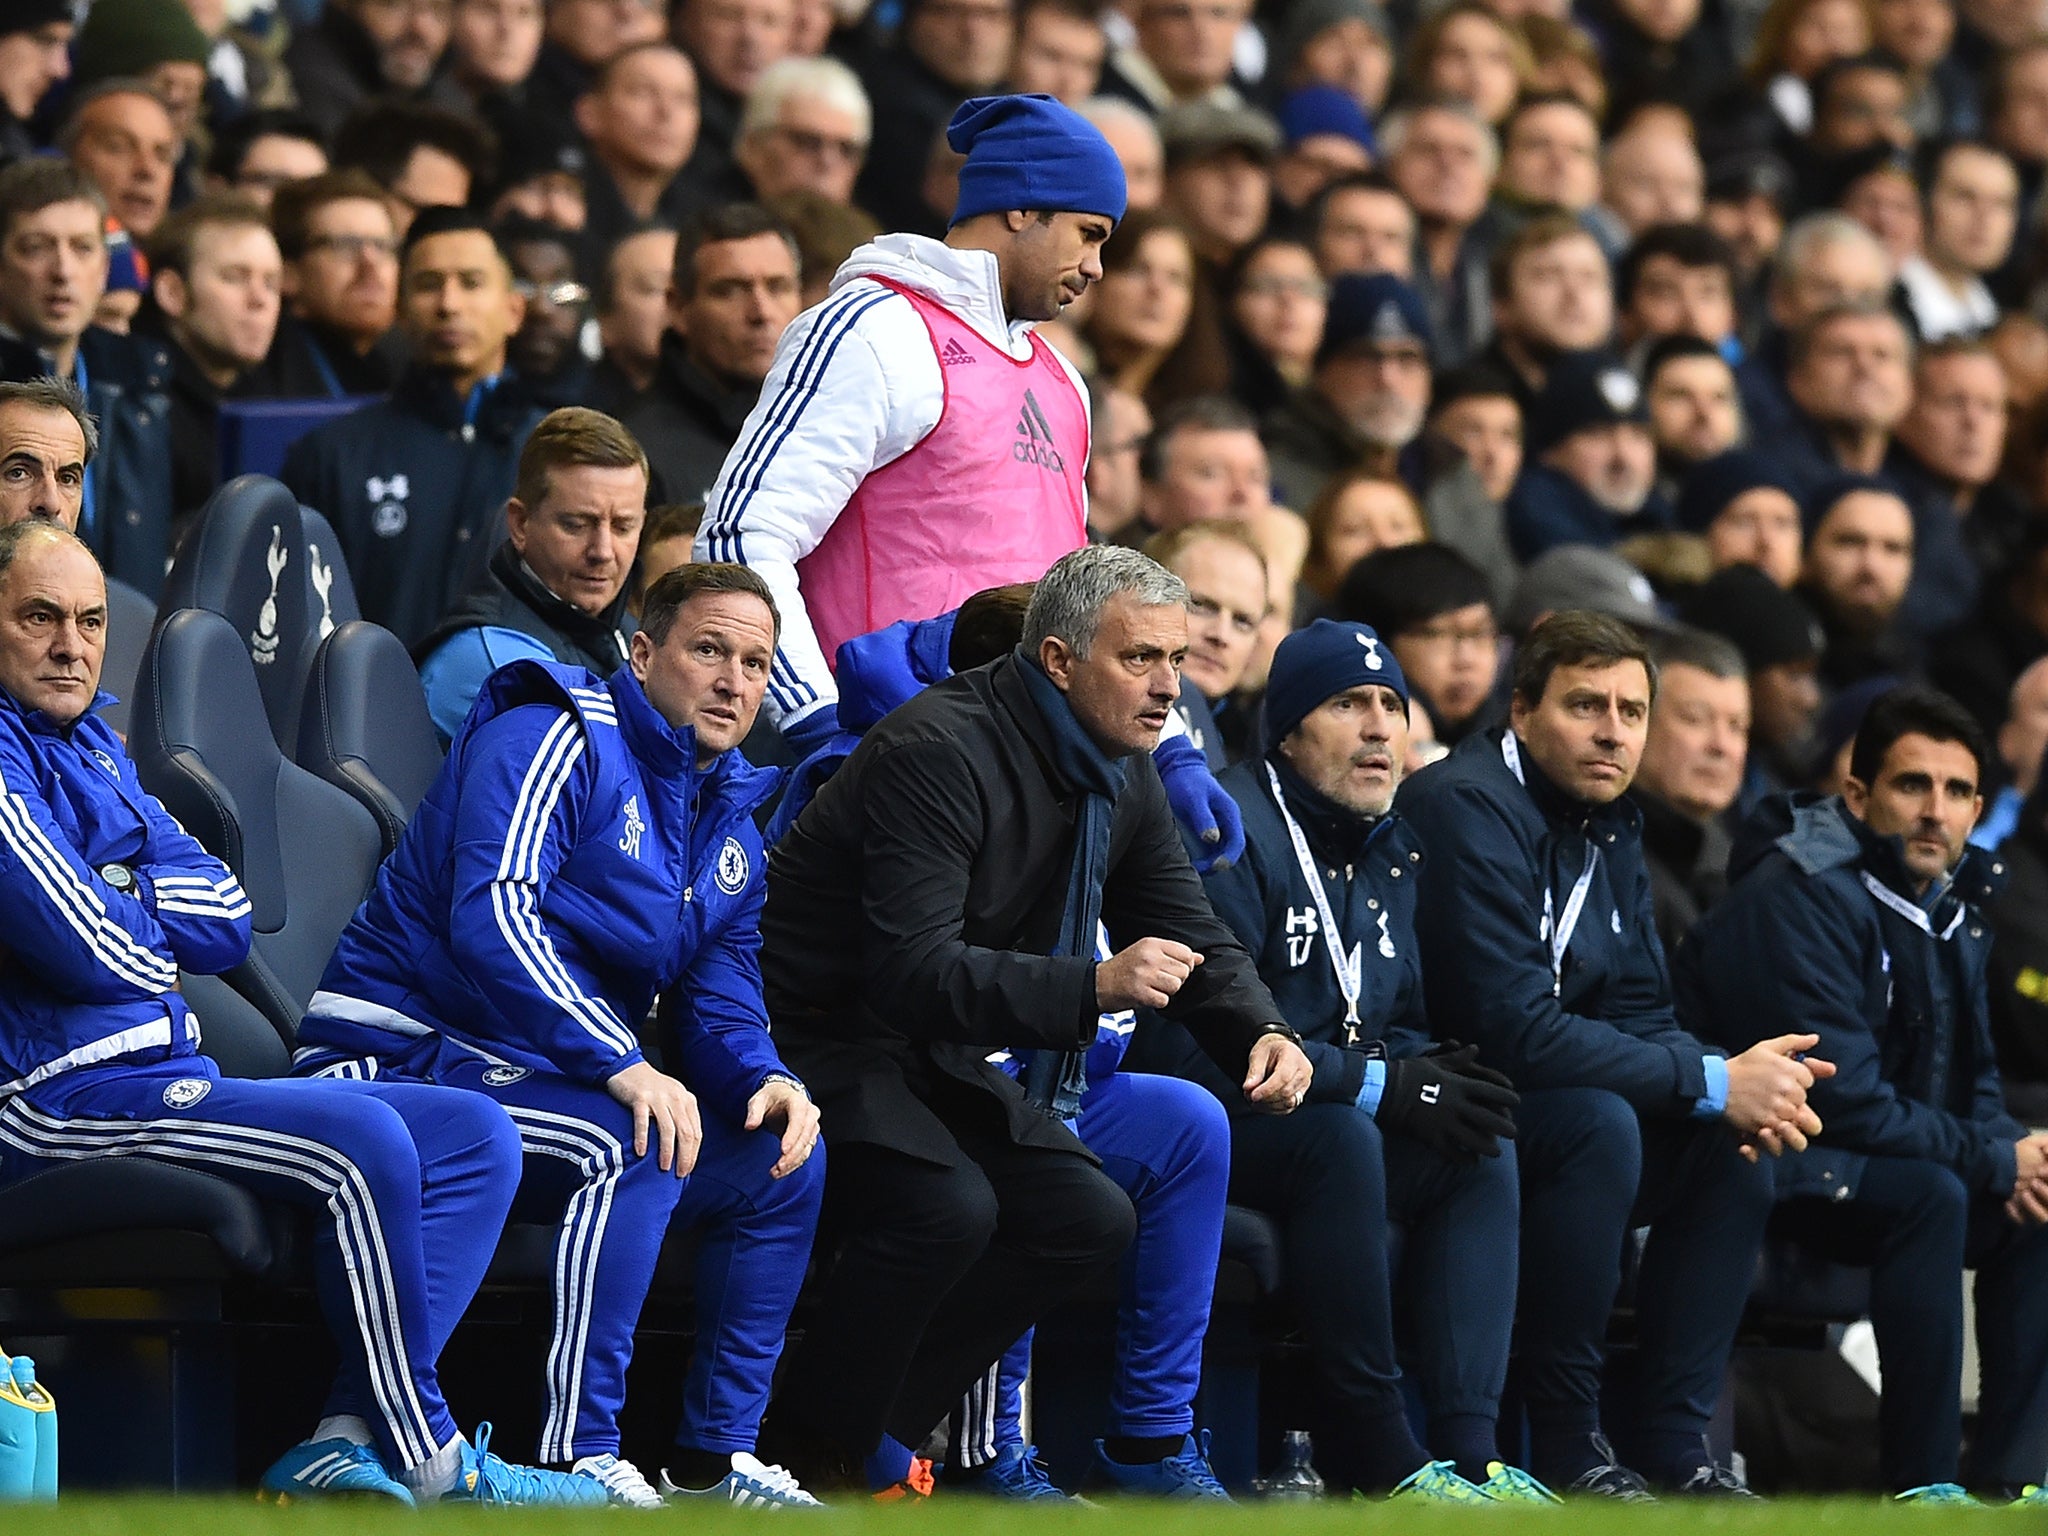 Diego Costa on the bench in the pink bib behind Jose Mourinho